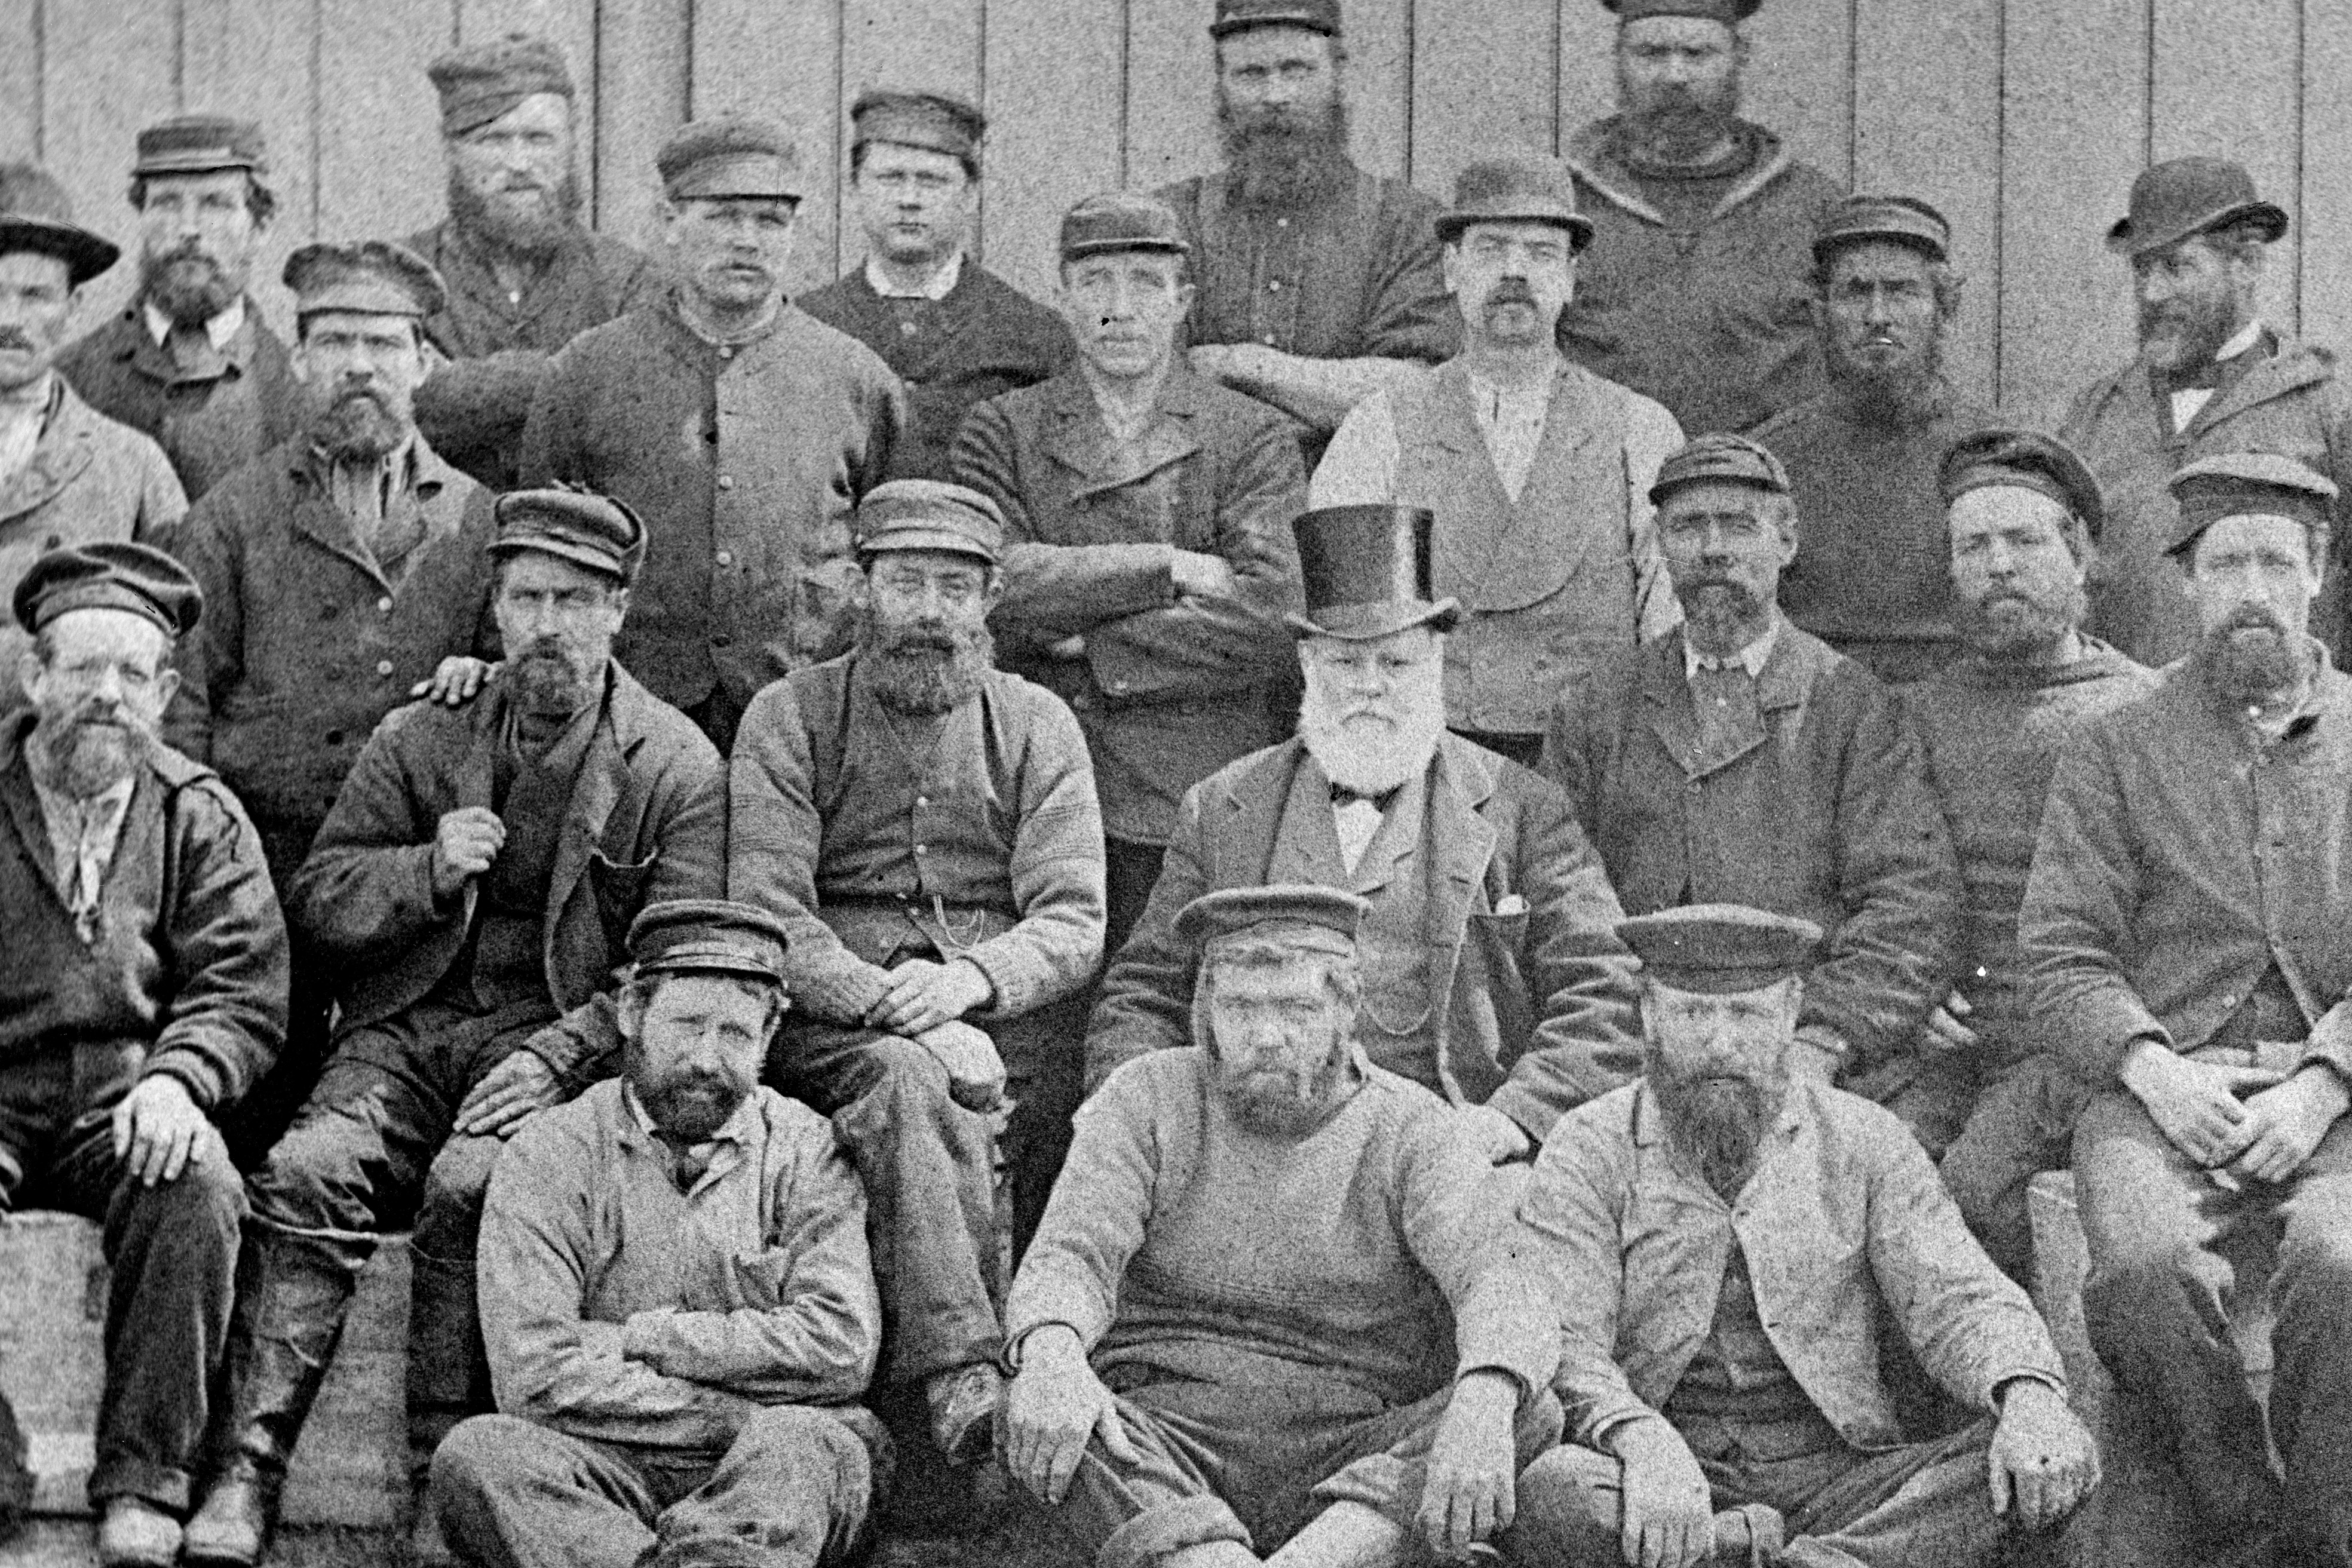 Crew of the whaler 'Hope'